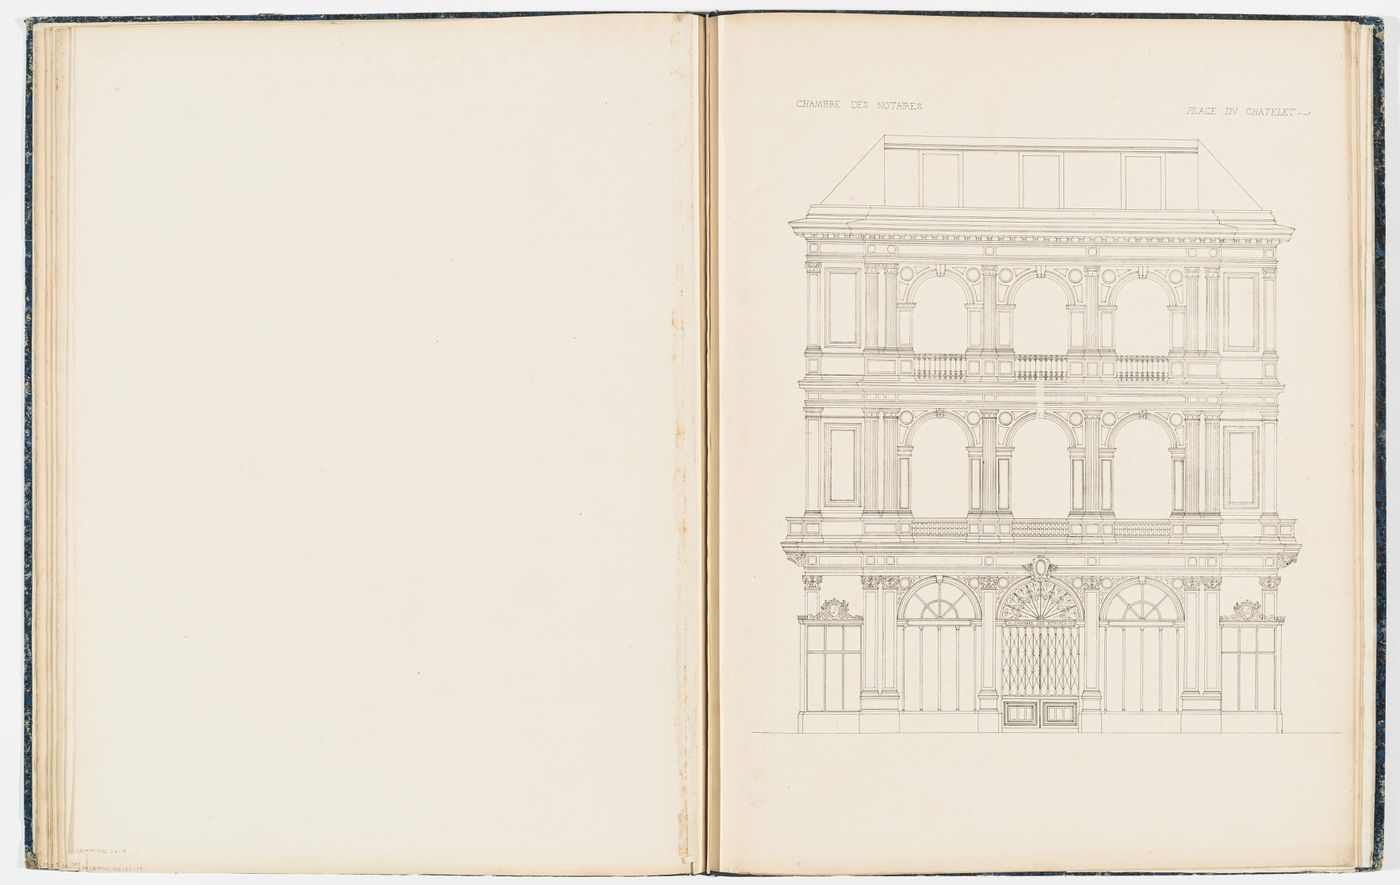 Elevation showing an alternate design for the principal façade of the Chambre des Notaires